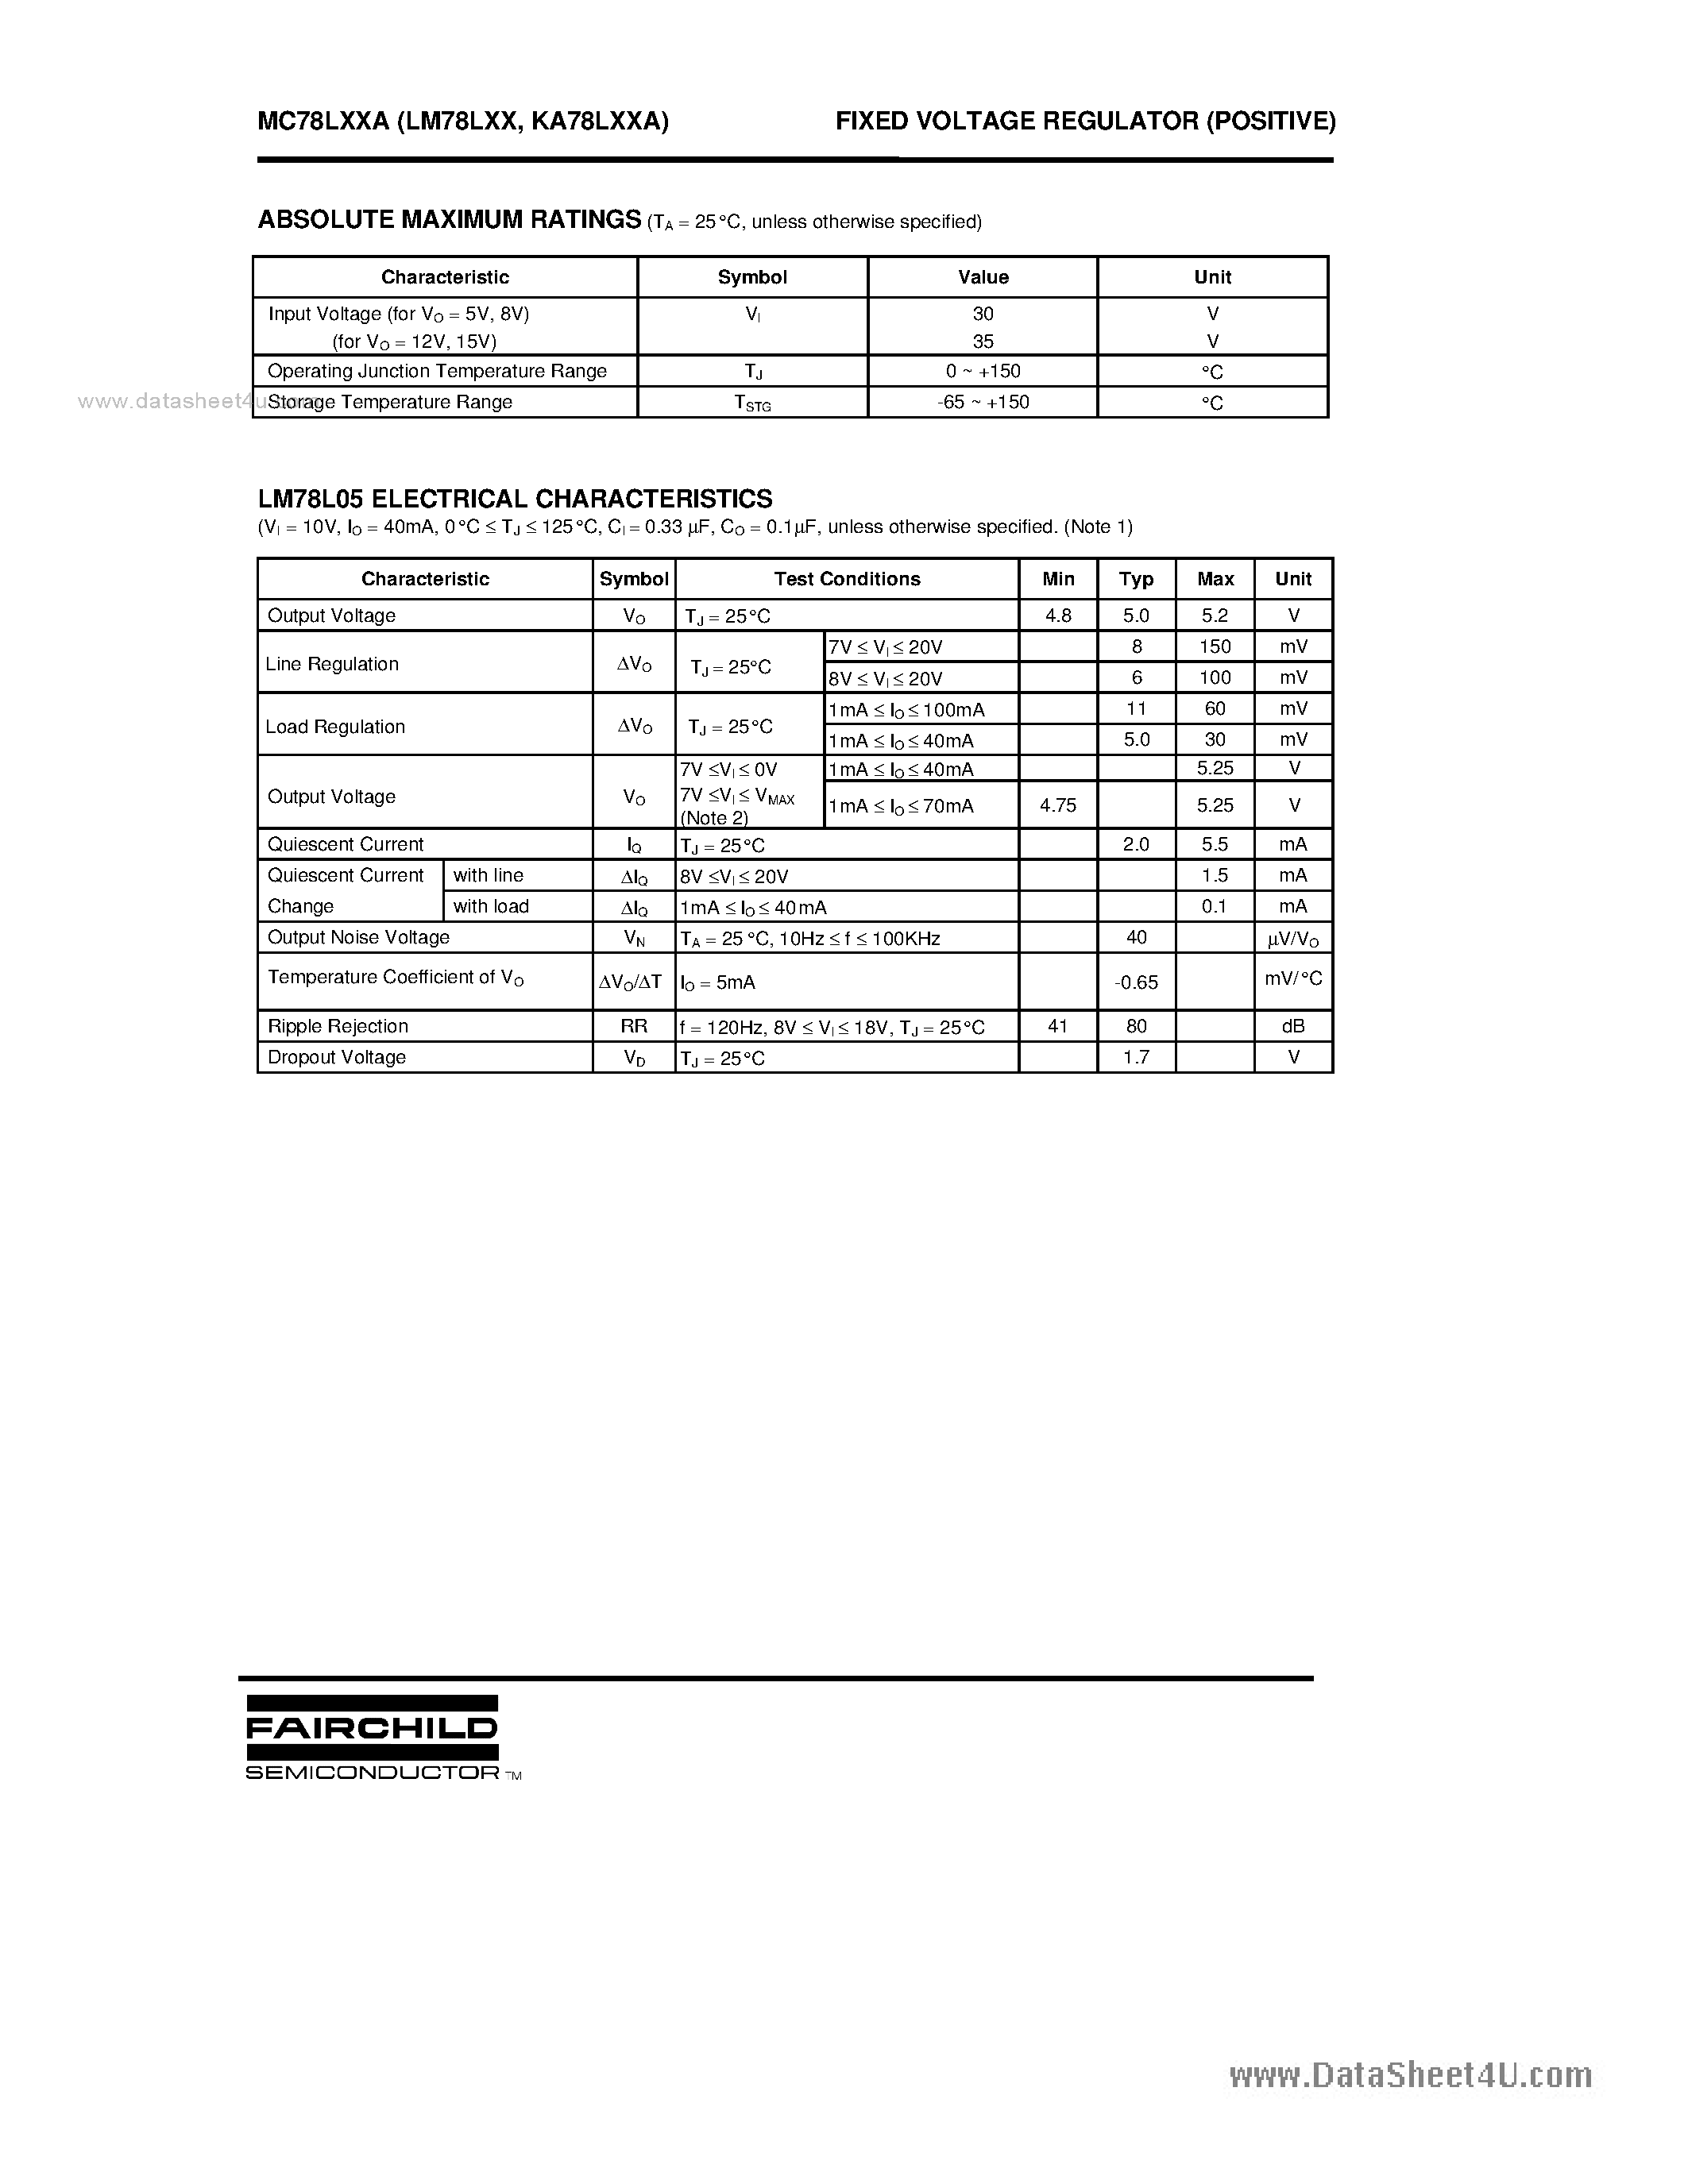 Datasheet LM78L05 - (LM78LxxA) FIXED VOLTAGE REGULATOR page 2